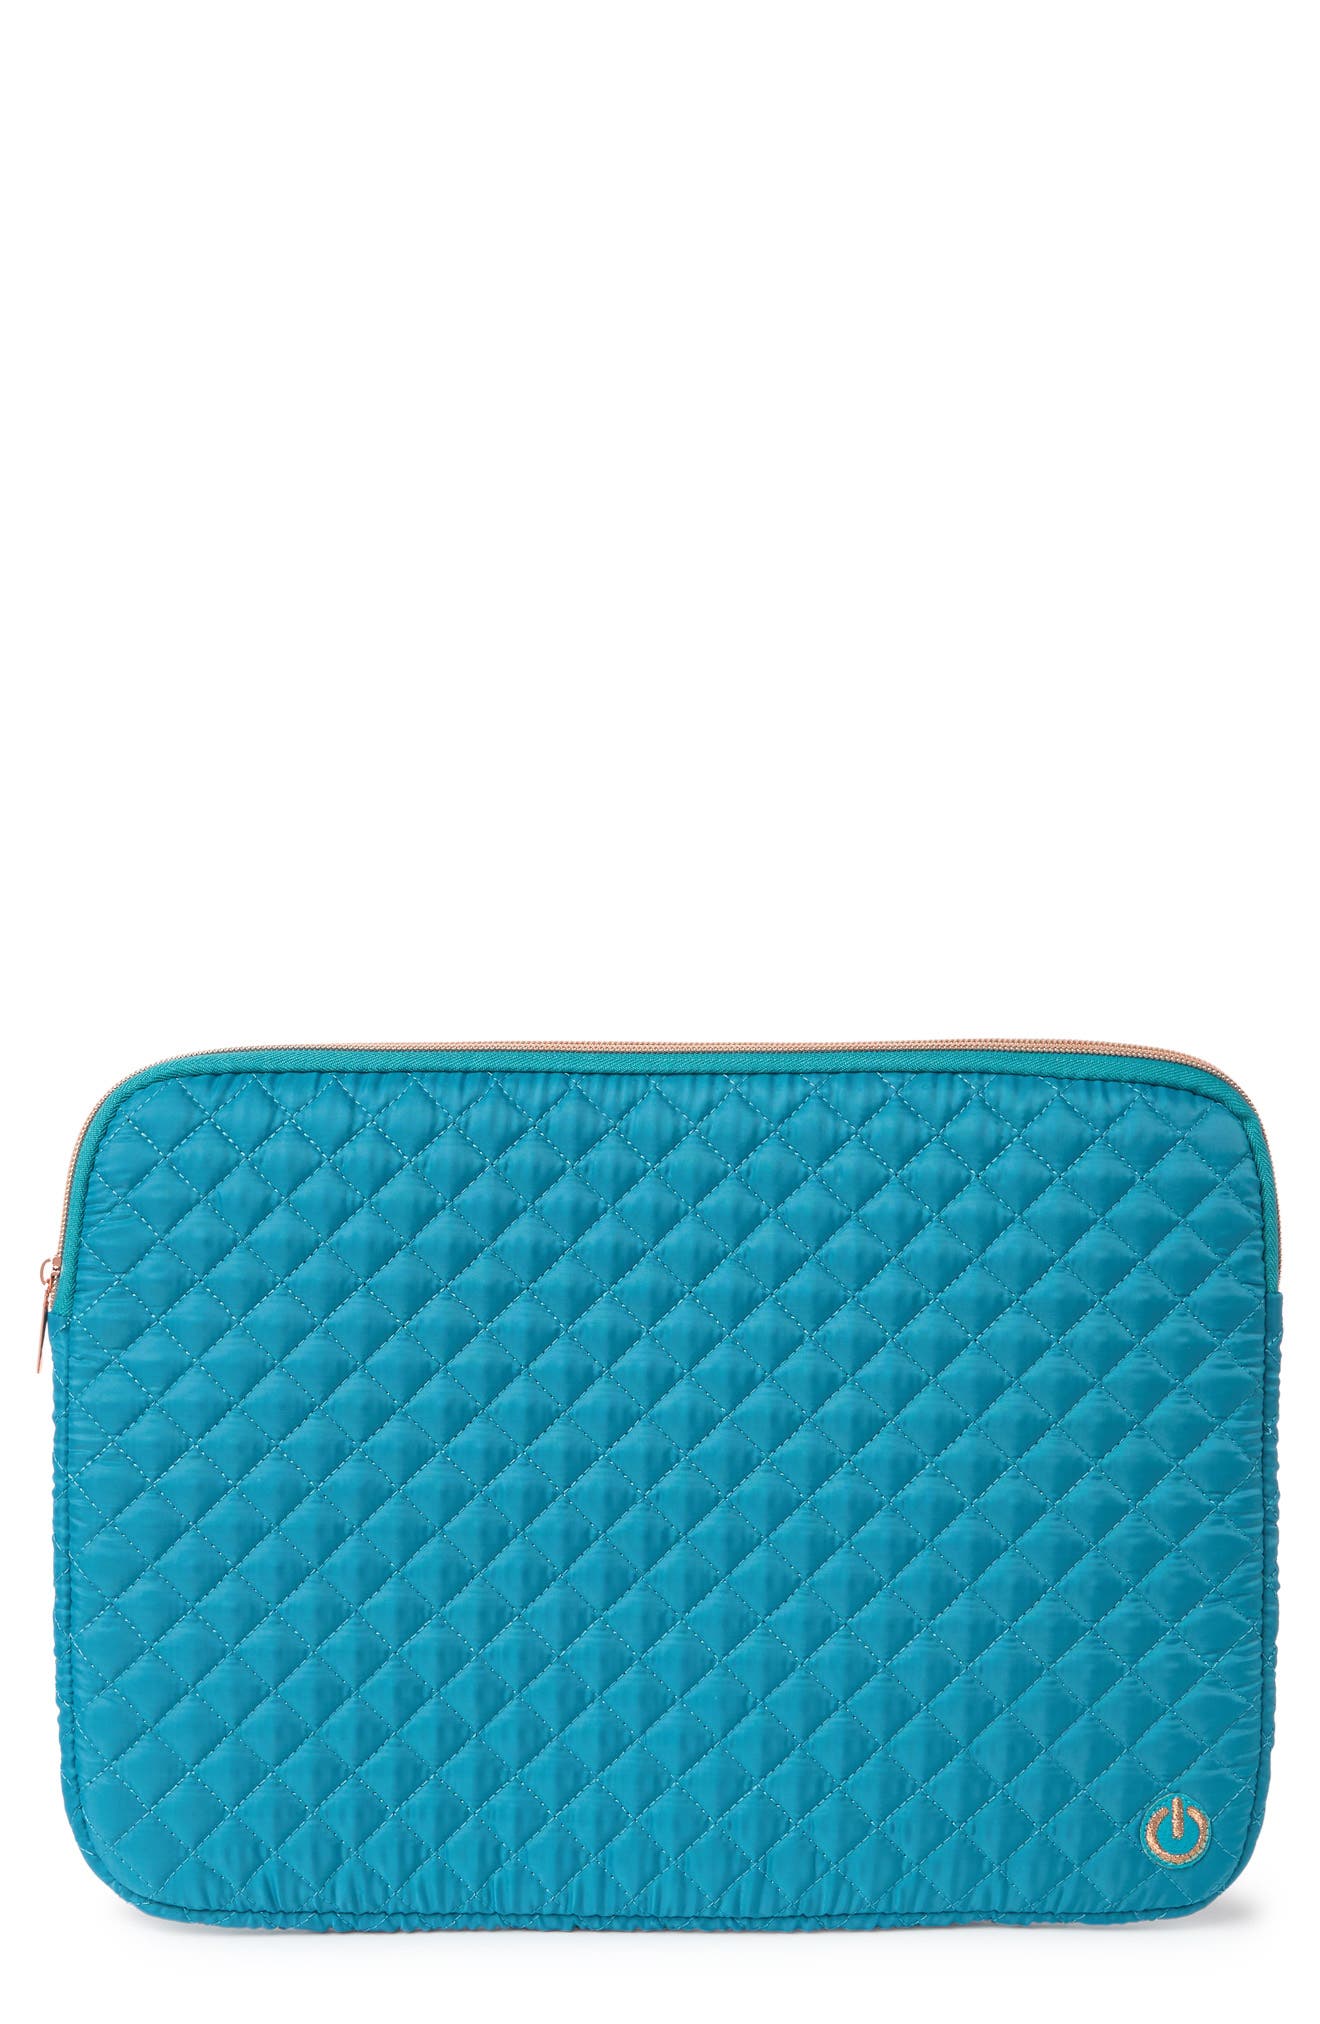 Mytagalongs Coco Quilt Laptop Sleeve In Turquoise/aqua1